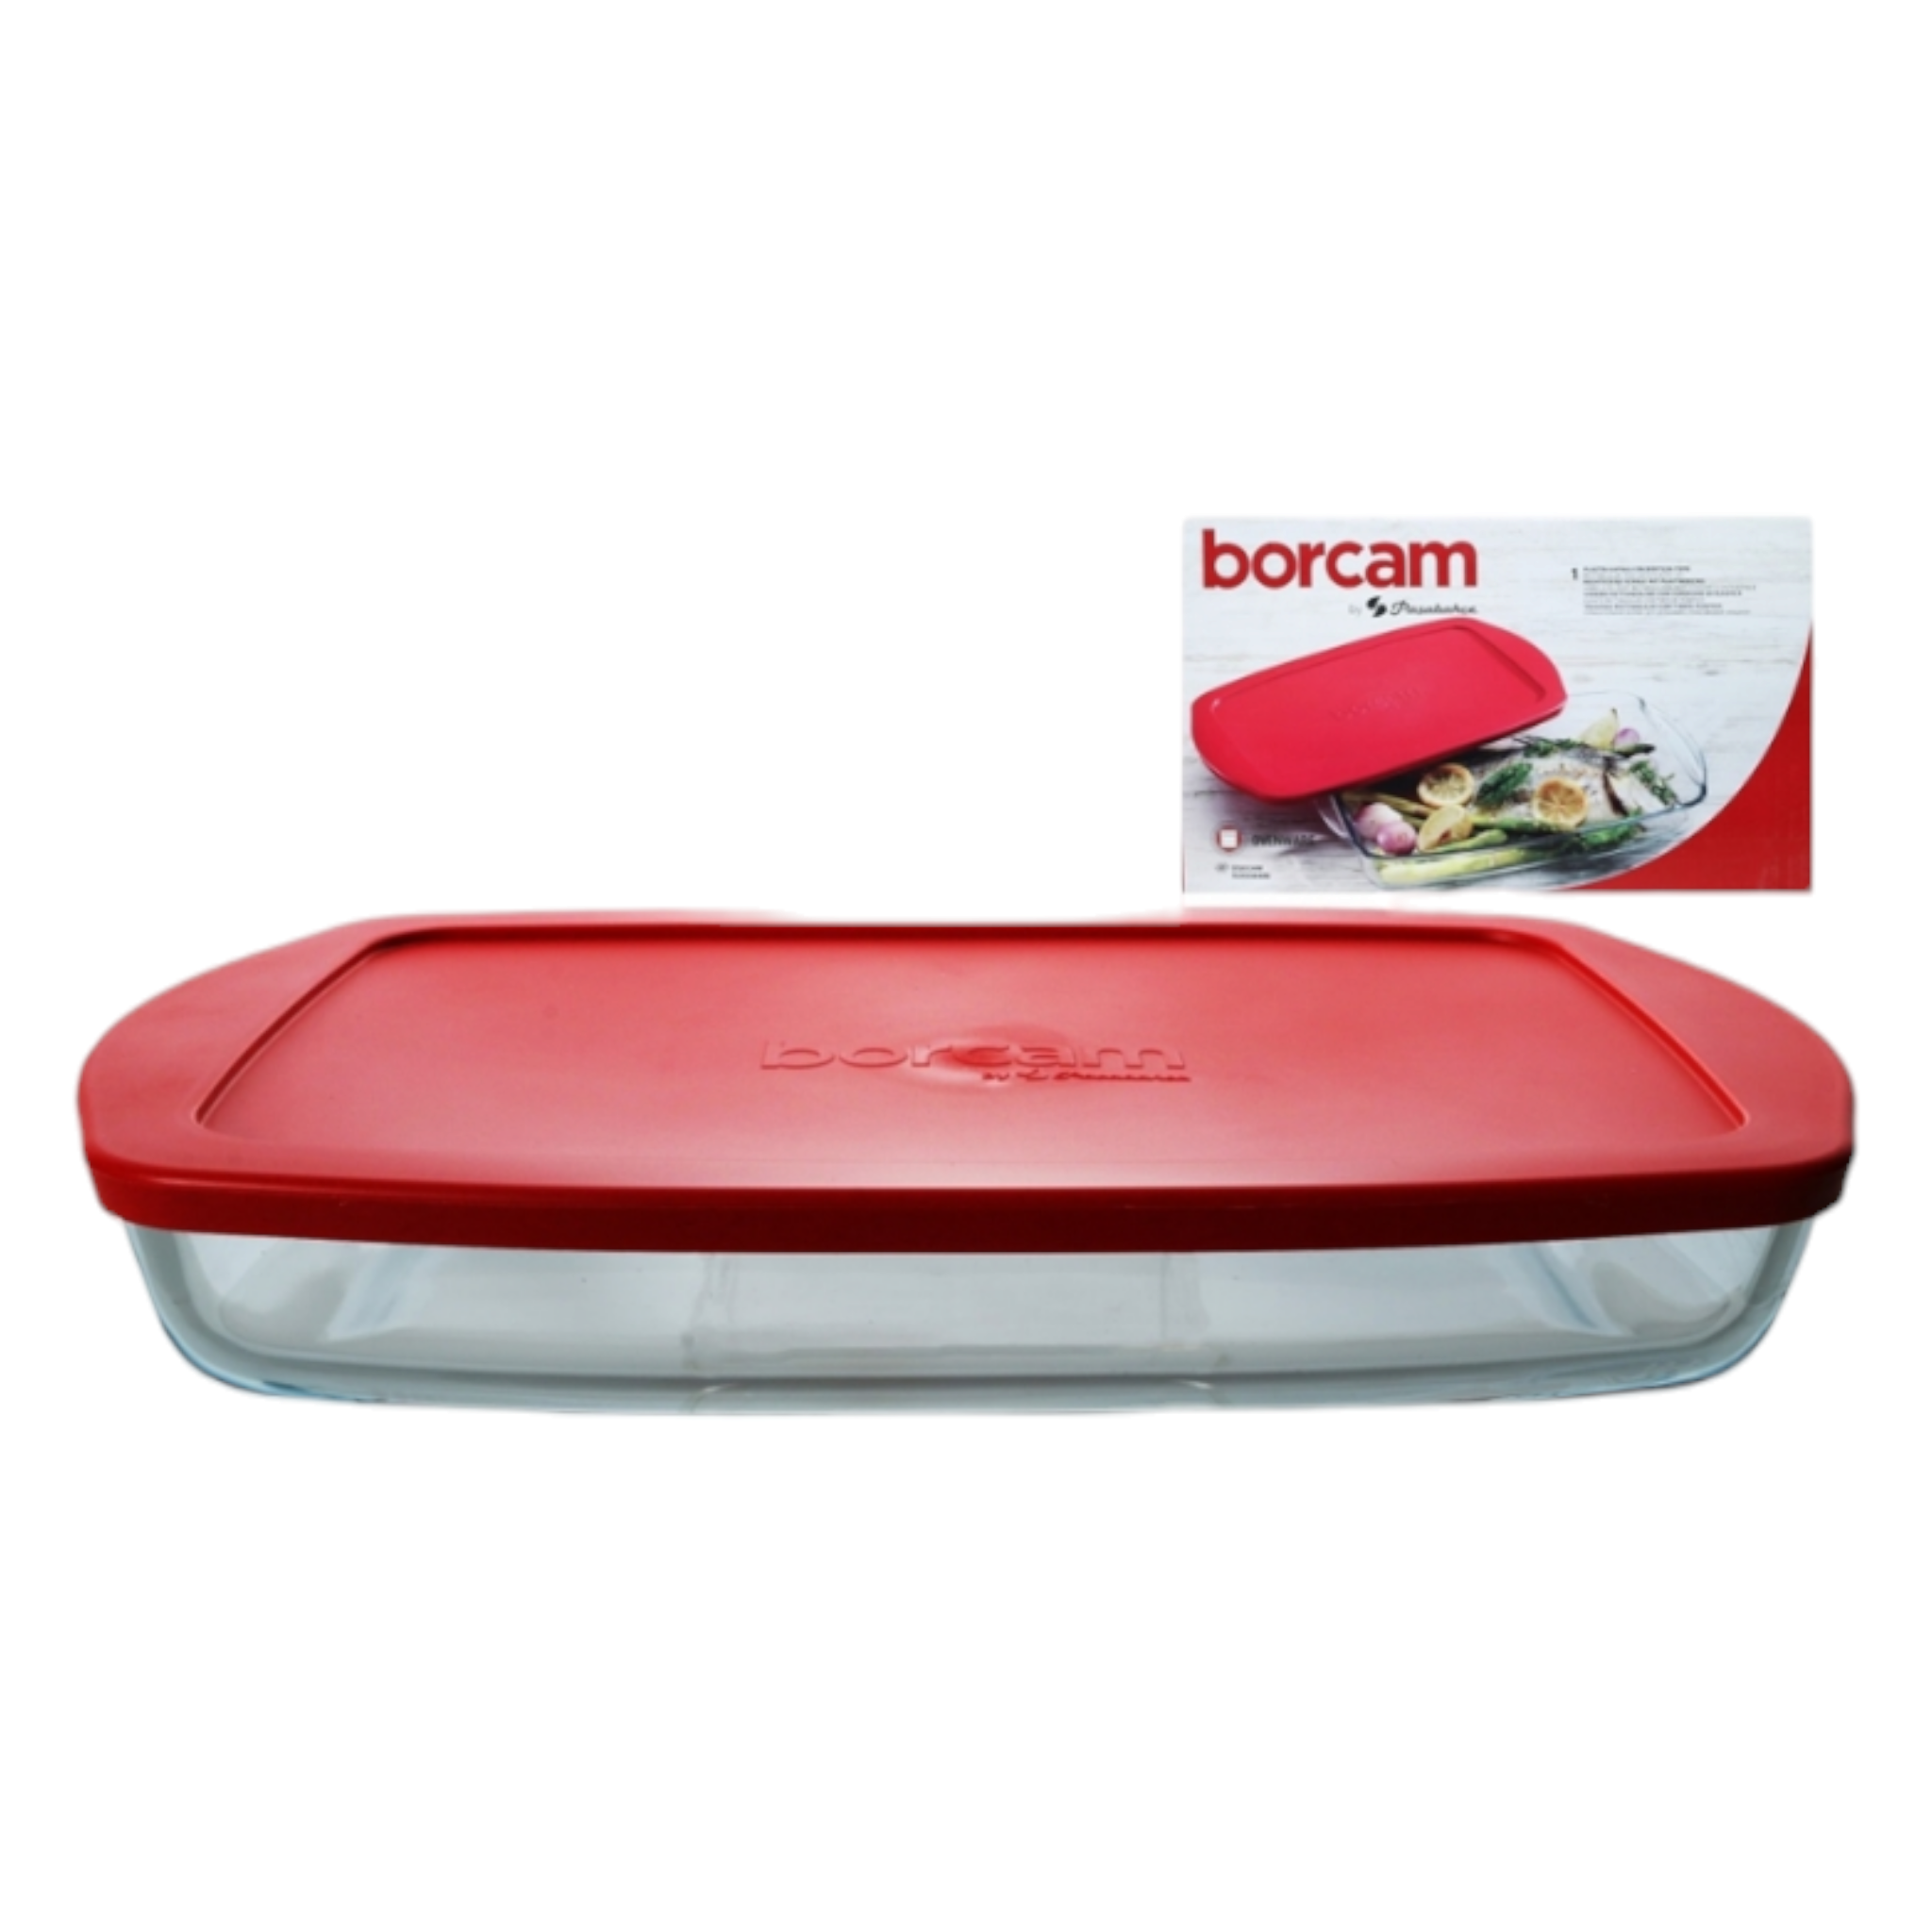 Borcam Glass Serving Dish Large Oven Dish Tray Rectangle with Red Lid 36x19x5cm 59006